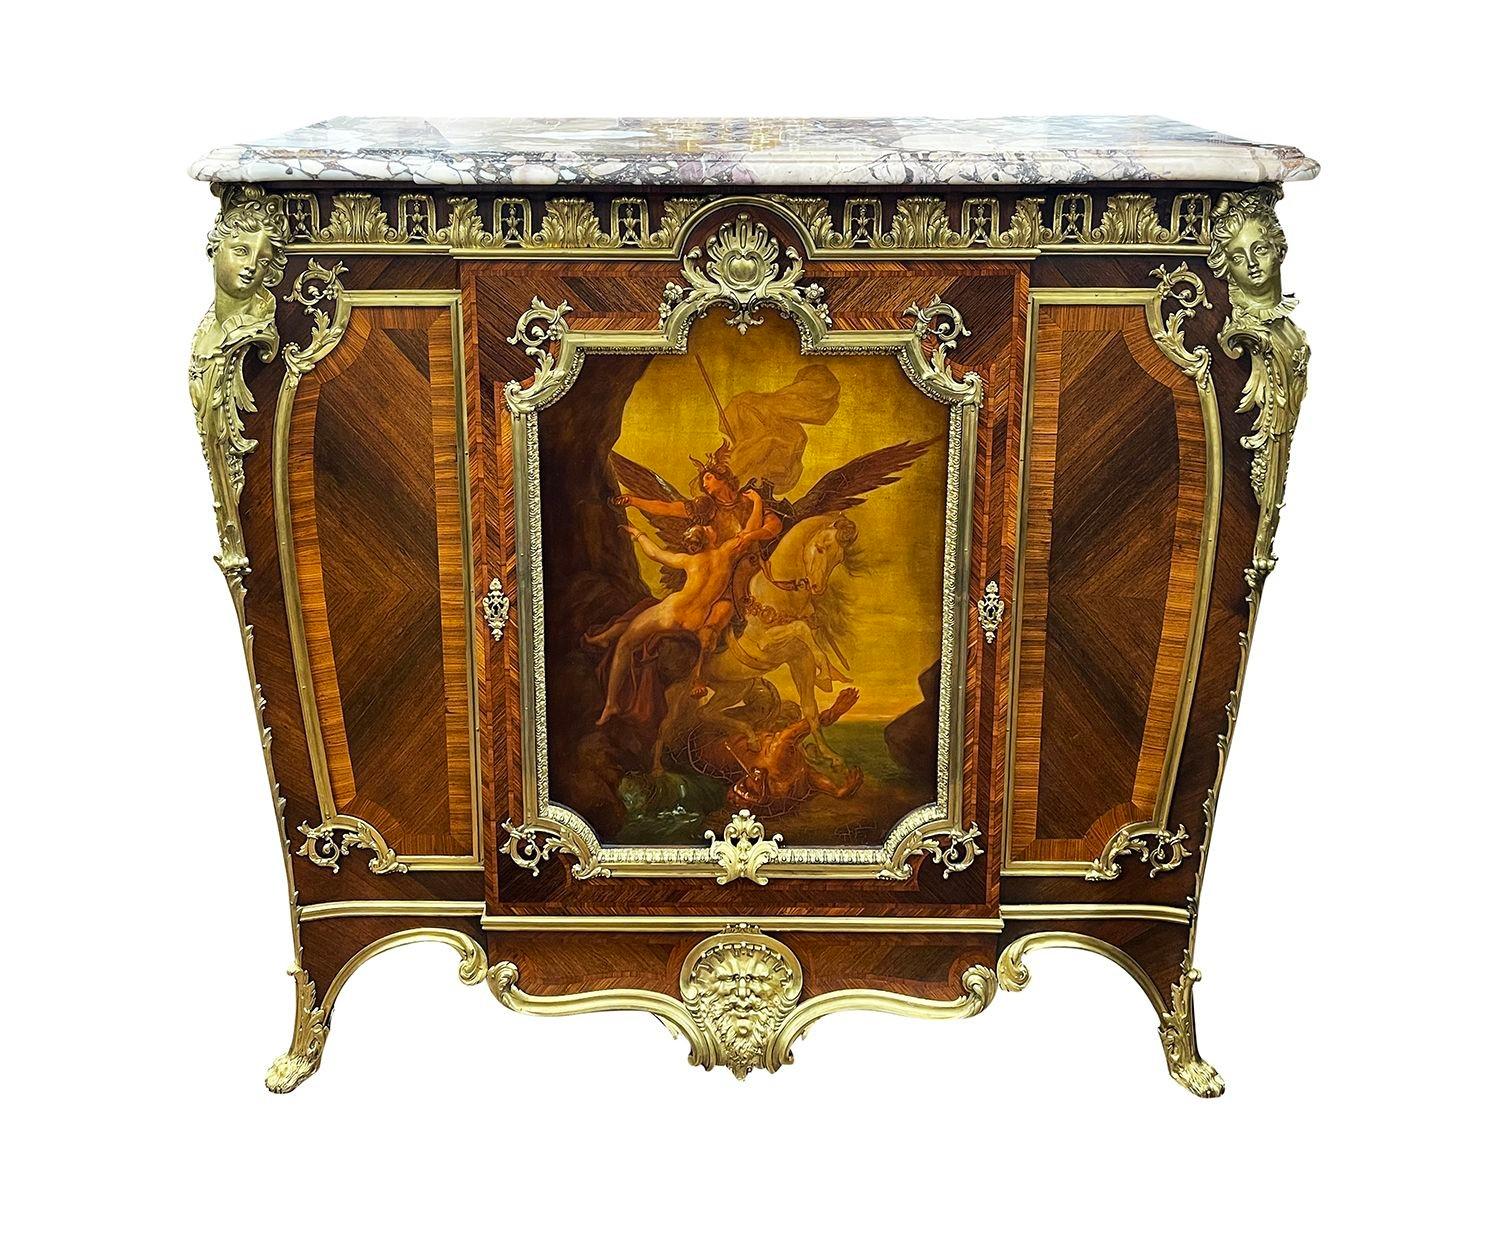 A fine quality late 19th century, Breccia marble topped side cabinet in the manner of Joseph Zweiner, having wonderful gilded ormolu monopodia mounts to either side, Tulipwood and Kingwood quartered and cross banded veneers to the front and sides.